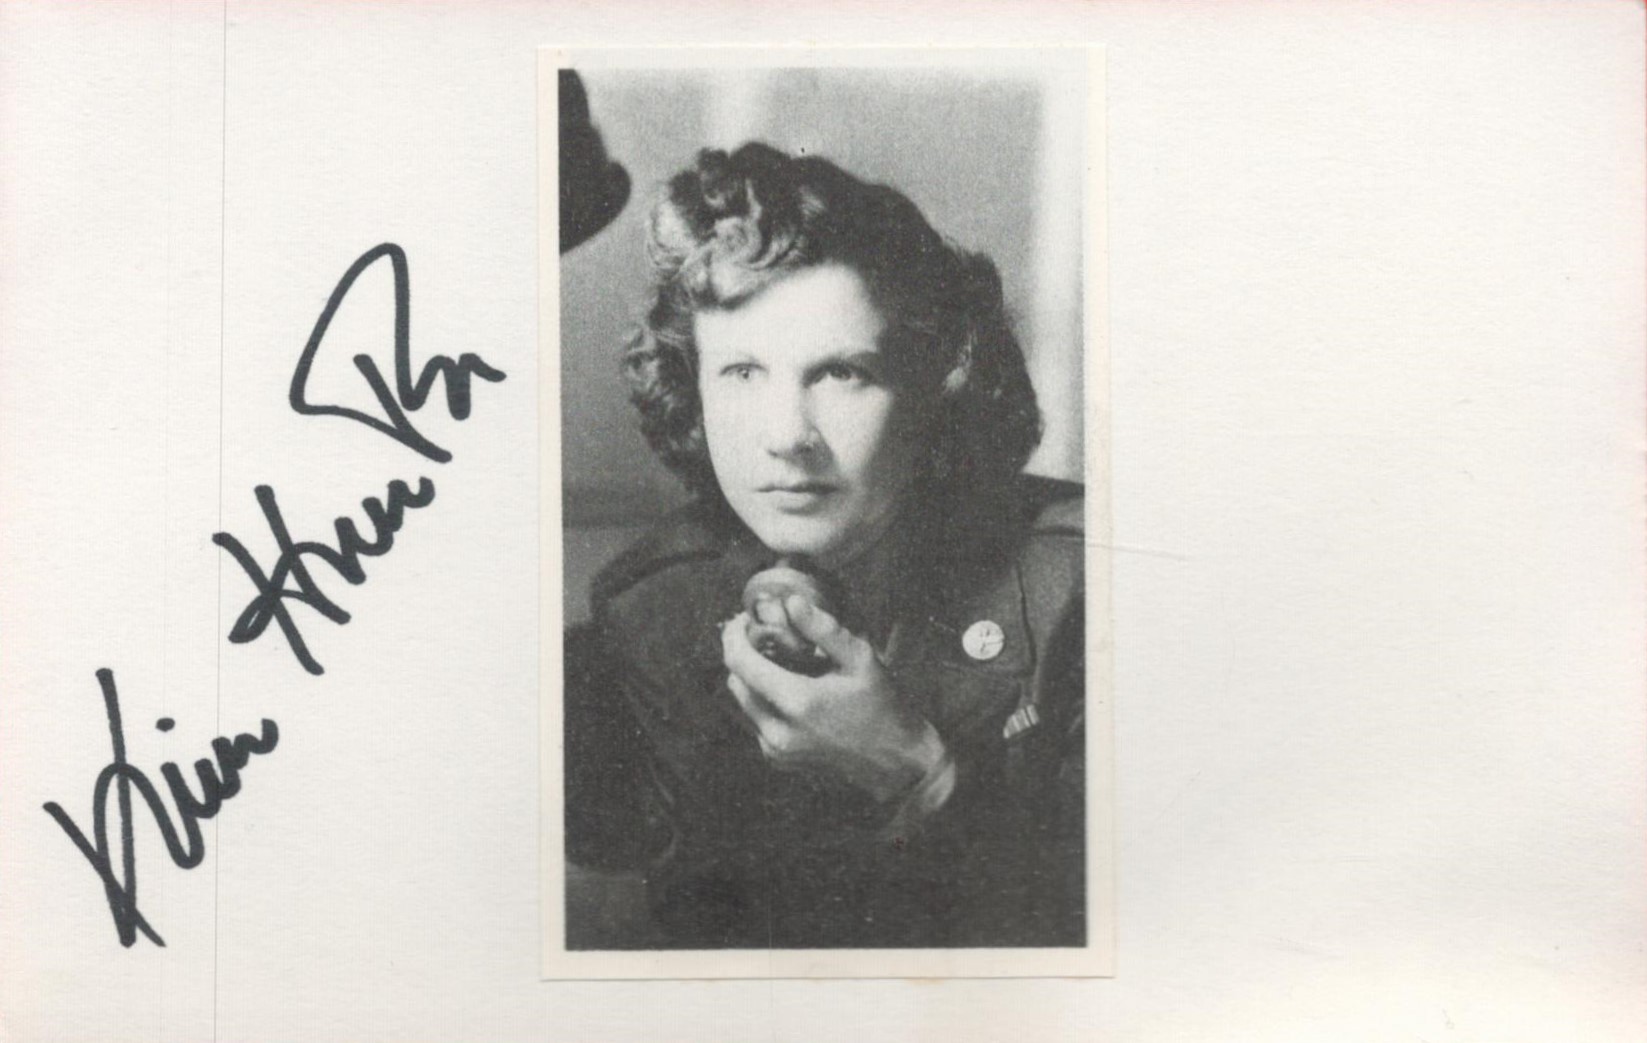 American Actress Kim Hunter Signed 5.5 x 3.5 inch White Signature Card. Black and White Image of